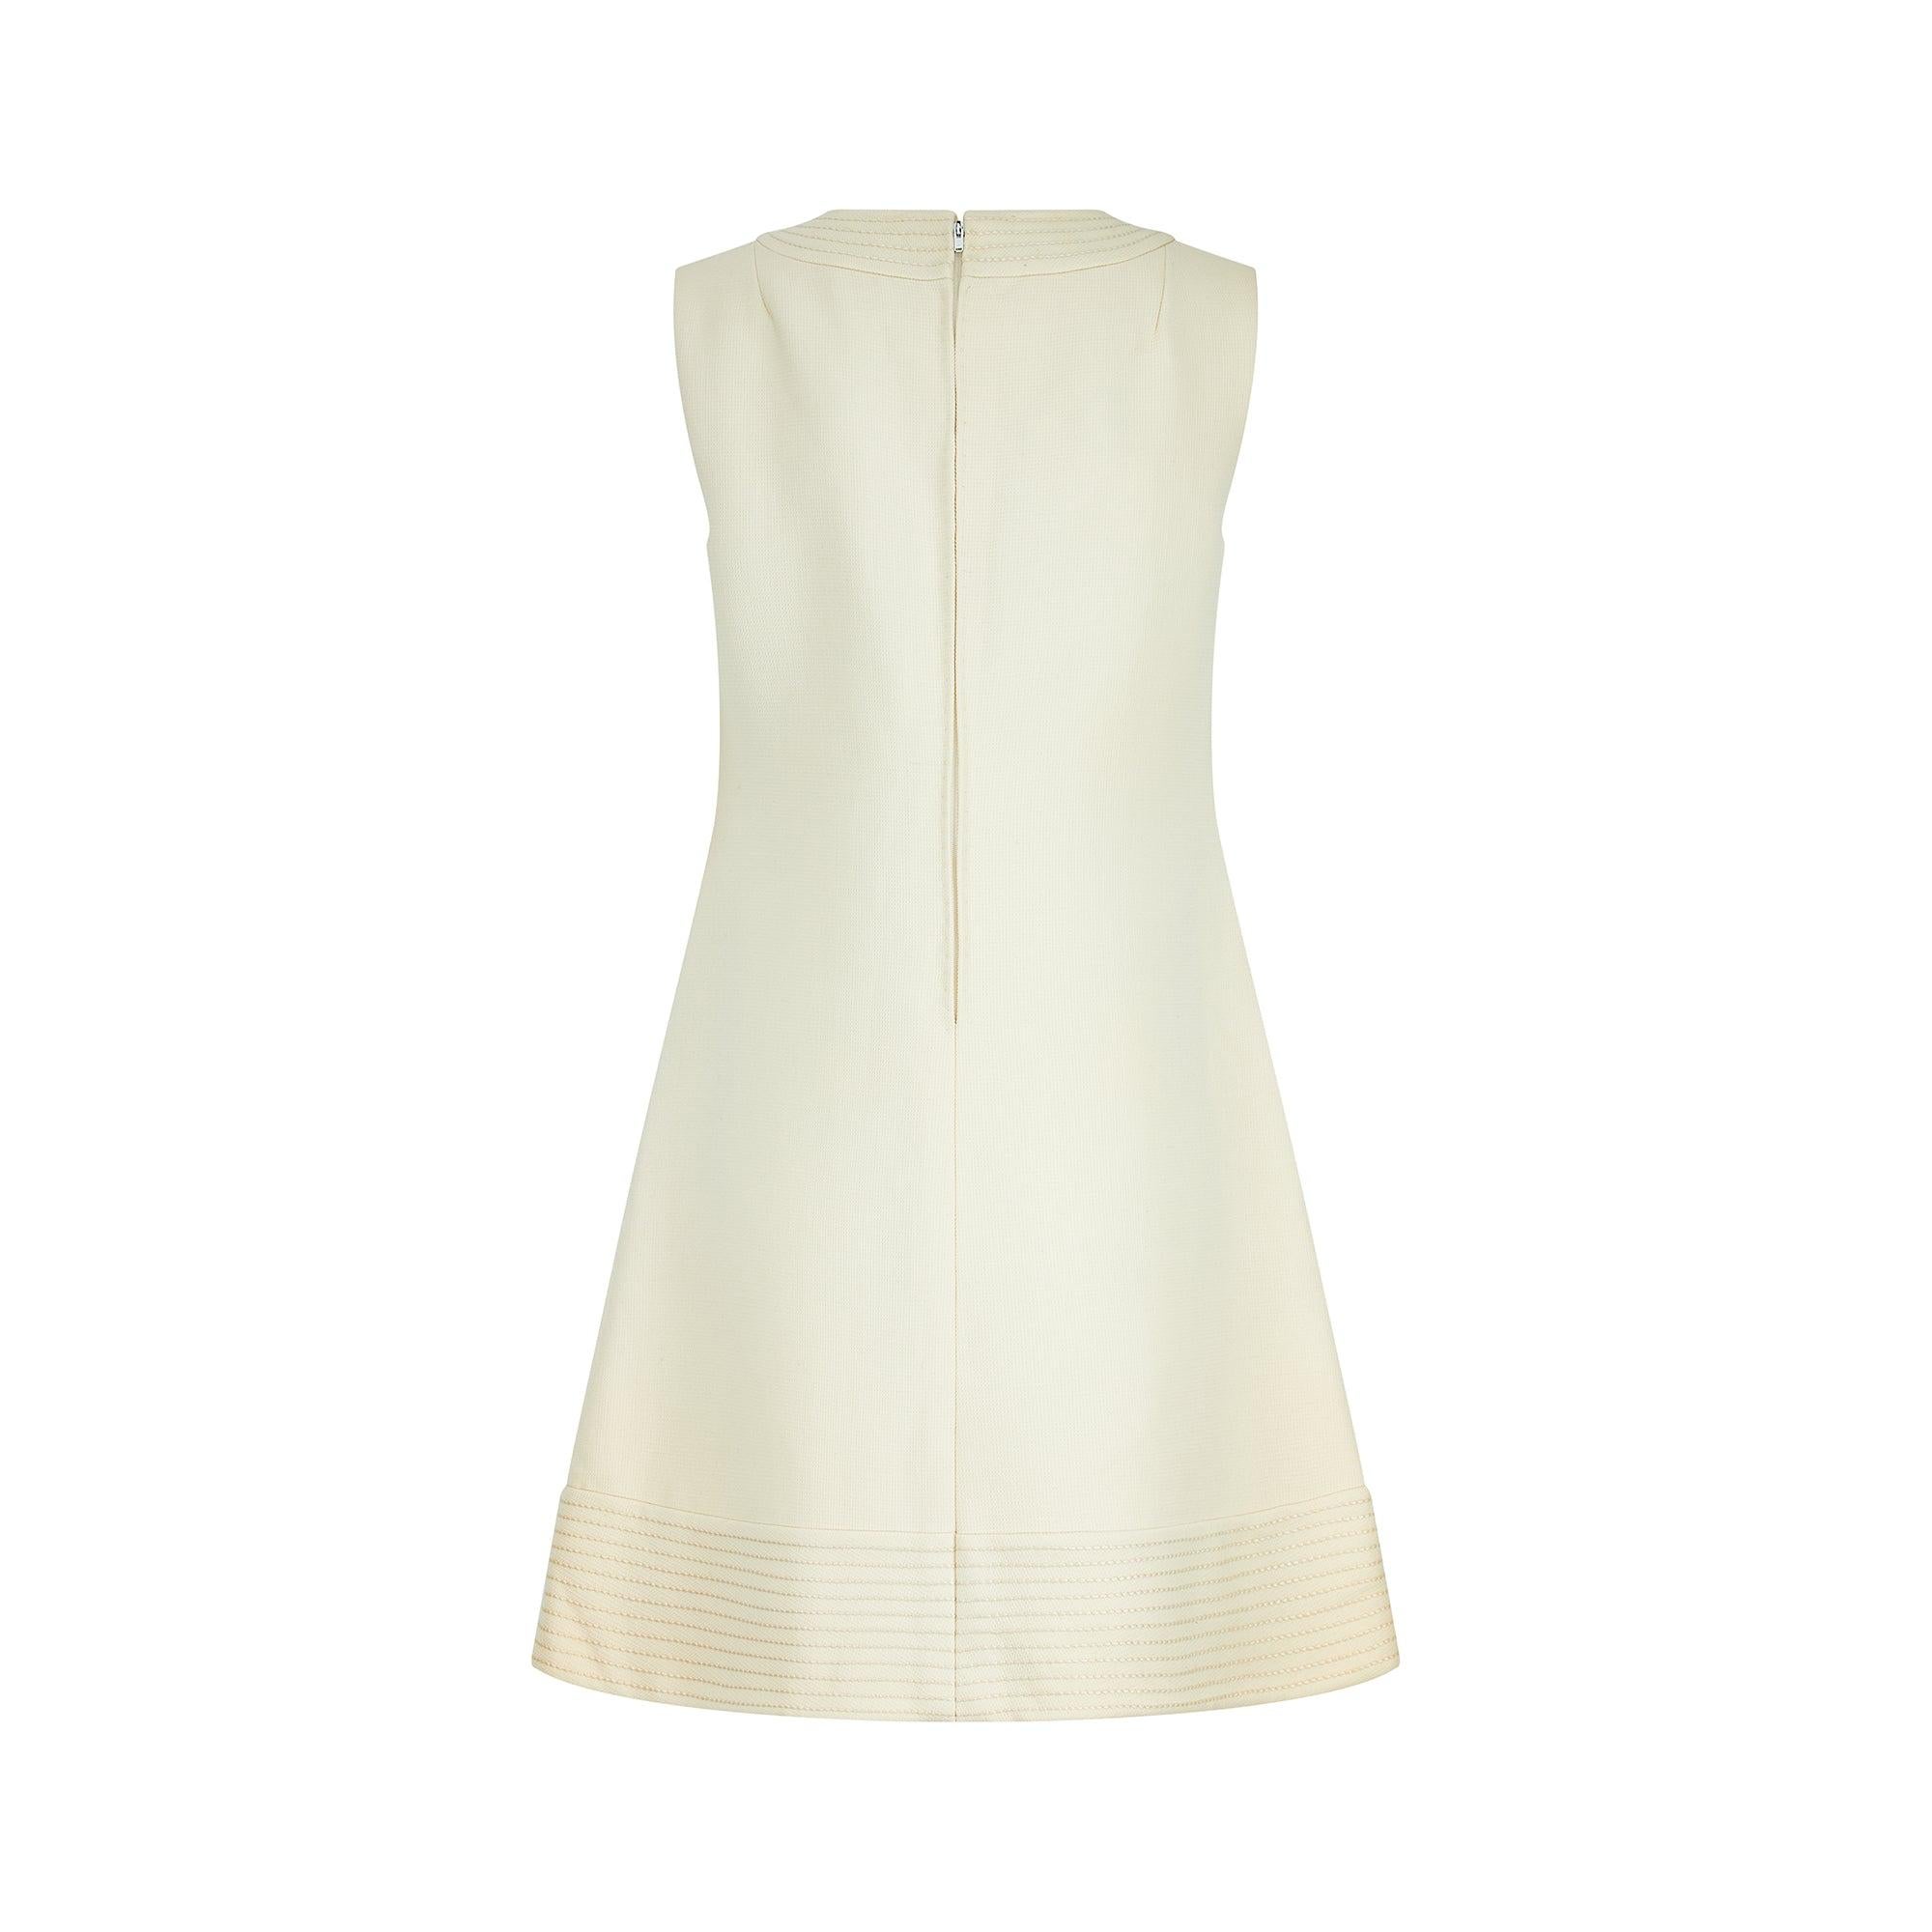 1960s Alice Boiget Cream Wool Mod Dress In Excellent Condition For Sale In London, GB